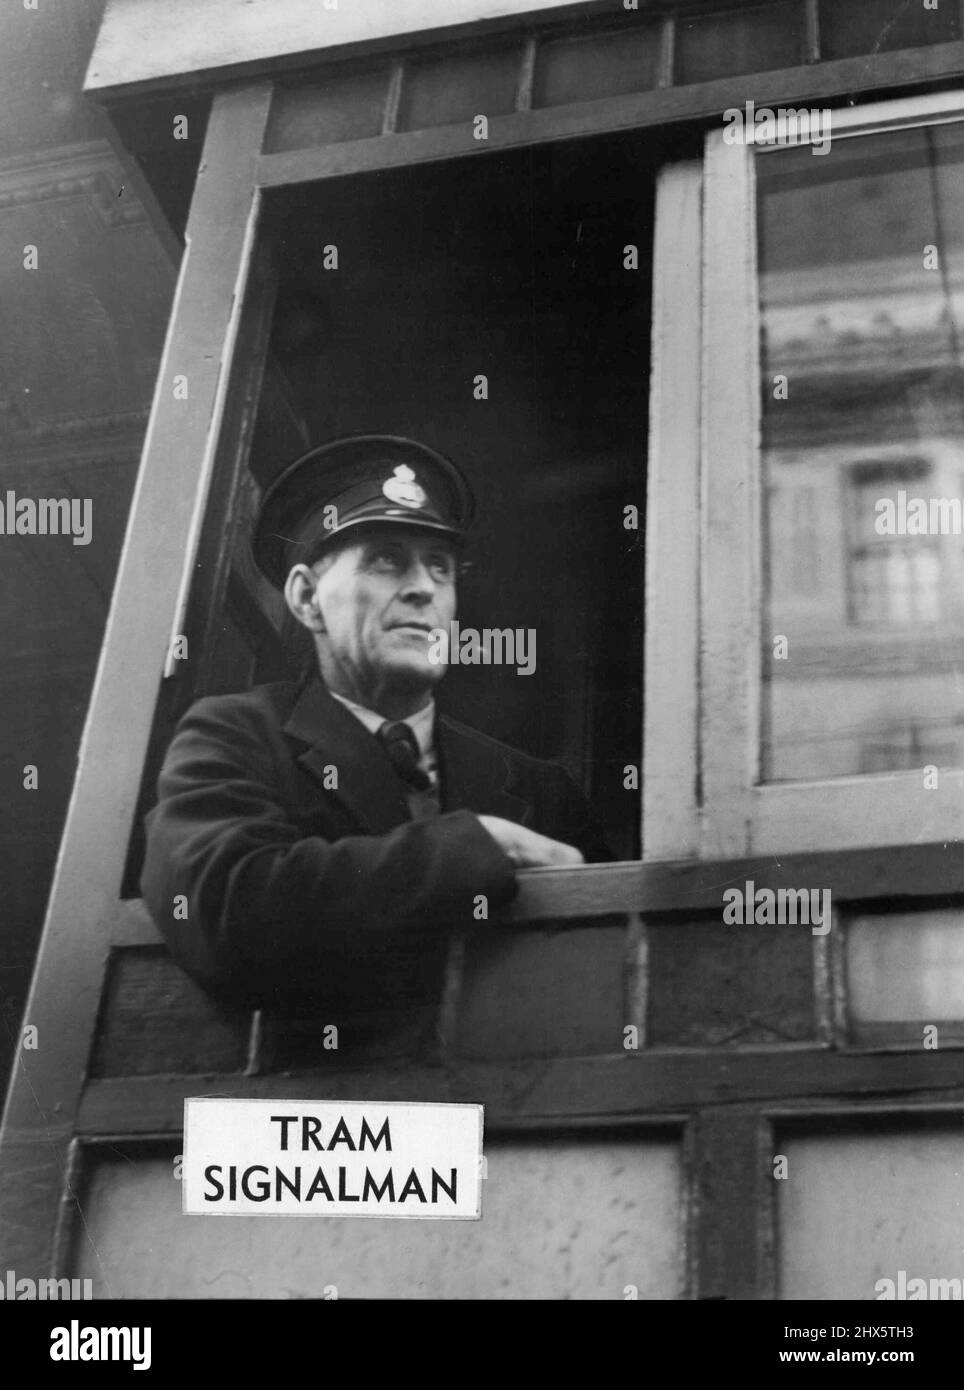 Tram Signalman - ' ...Because I'm king in my own little castle,' says signalman Arthur Markham. He's the man who sits up in the little tram signal - box at the King - street intersection. 'No one interferes with me up here unless it's that traffic cop down there,' he said, peering down from his 10ft. tower. 'Our ideas about traffic don't always coincide.' He watches over his trams like a mother, and sometimes frowns reproachfully at the ordinary cars and taxis turning left and right below. 'Th Stock Photo